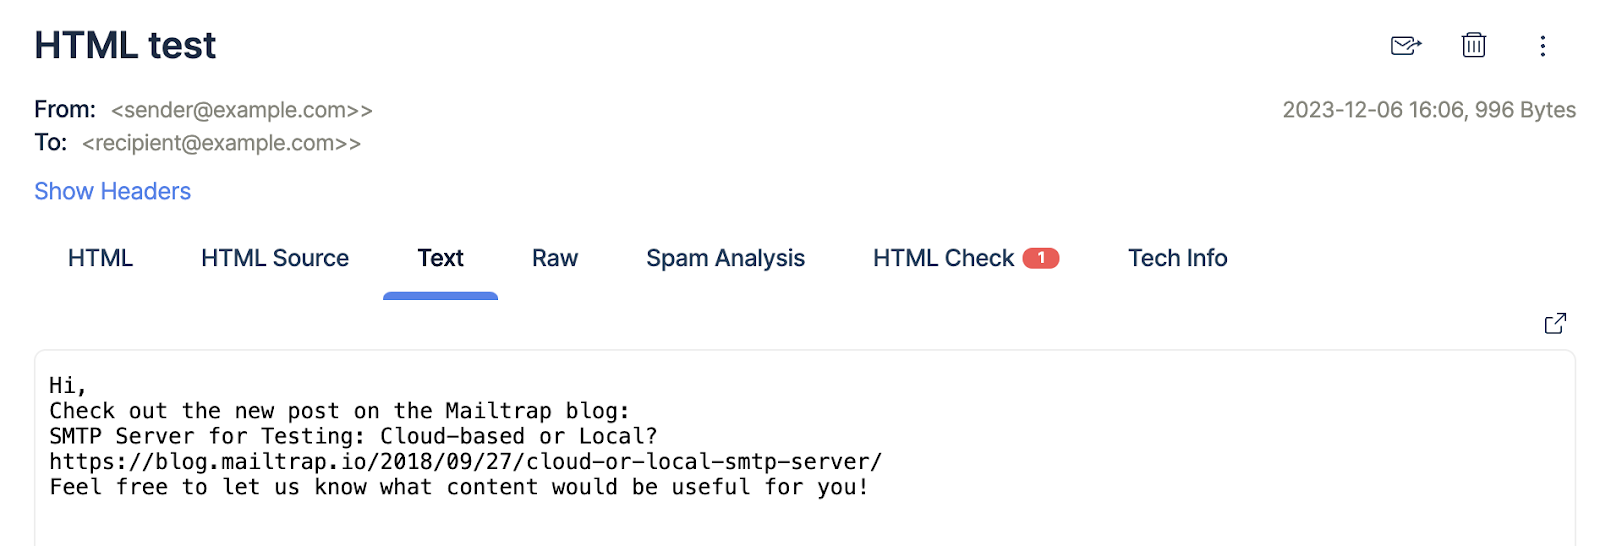 HTML and Text content comparison in Mailtrap Email Testing 